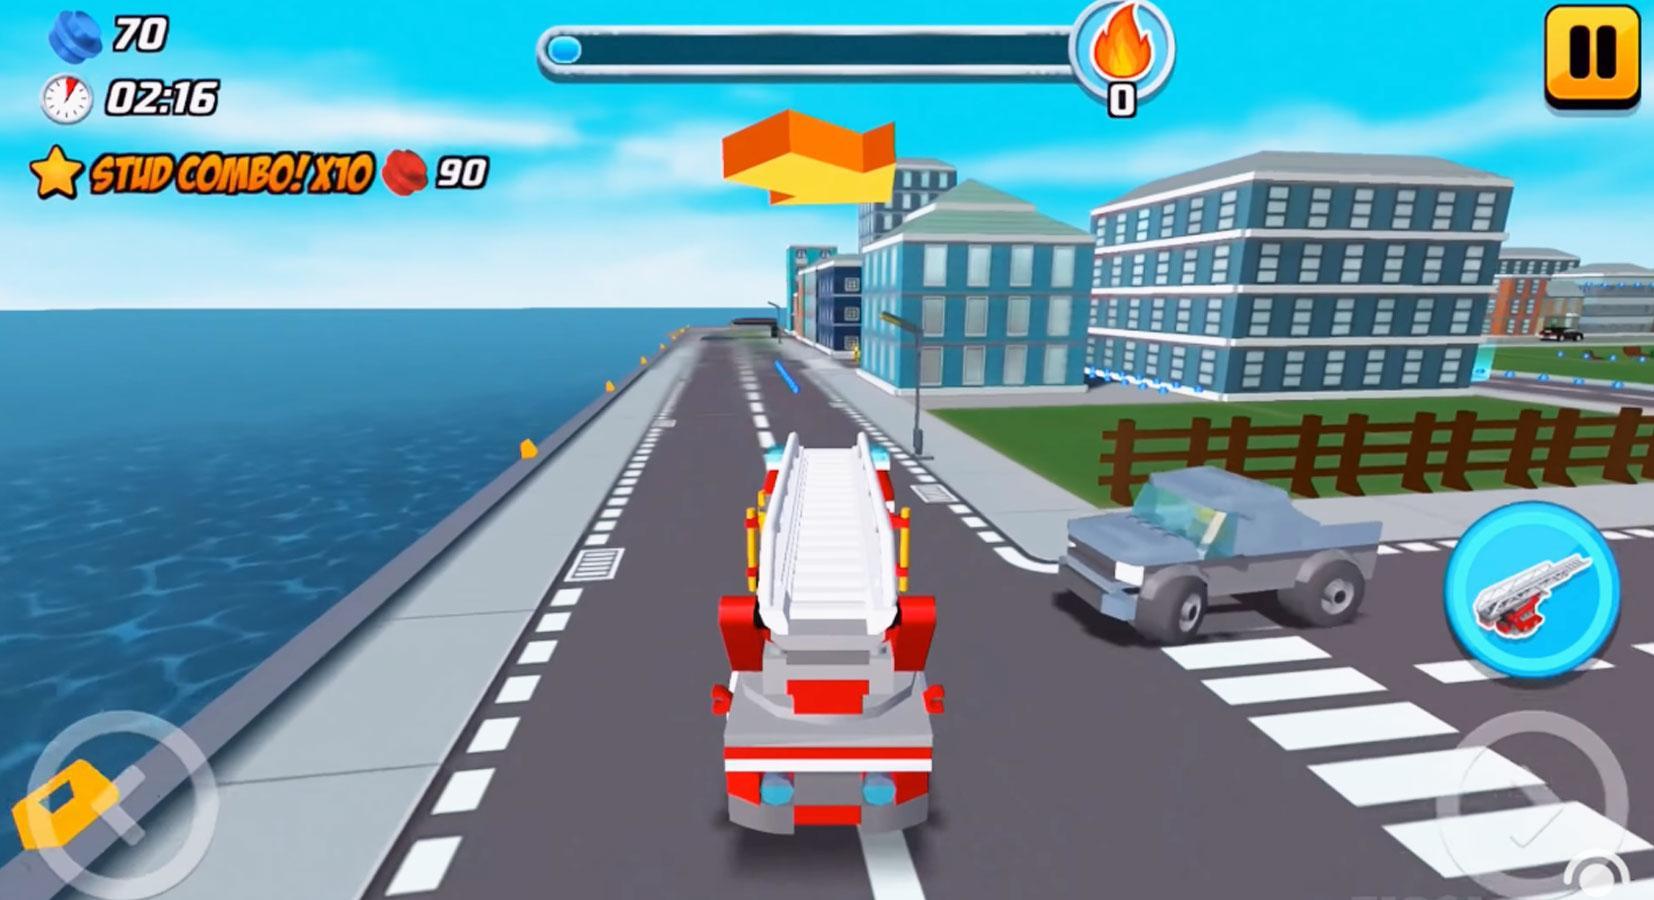 DEGUIDE LEGO City My City 2 for Android - APK Download